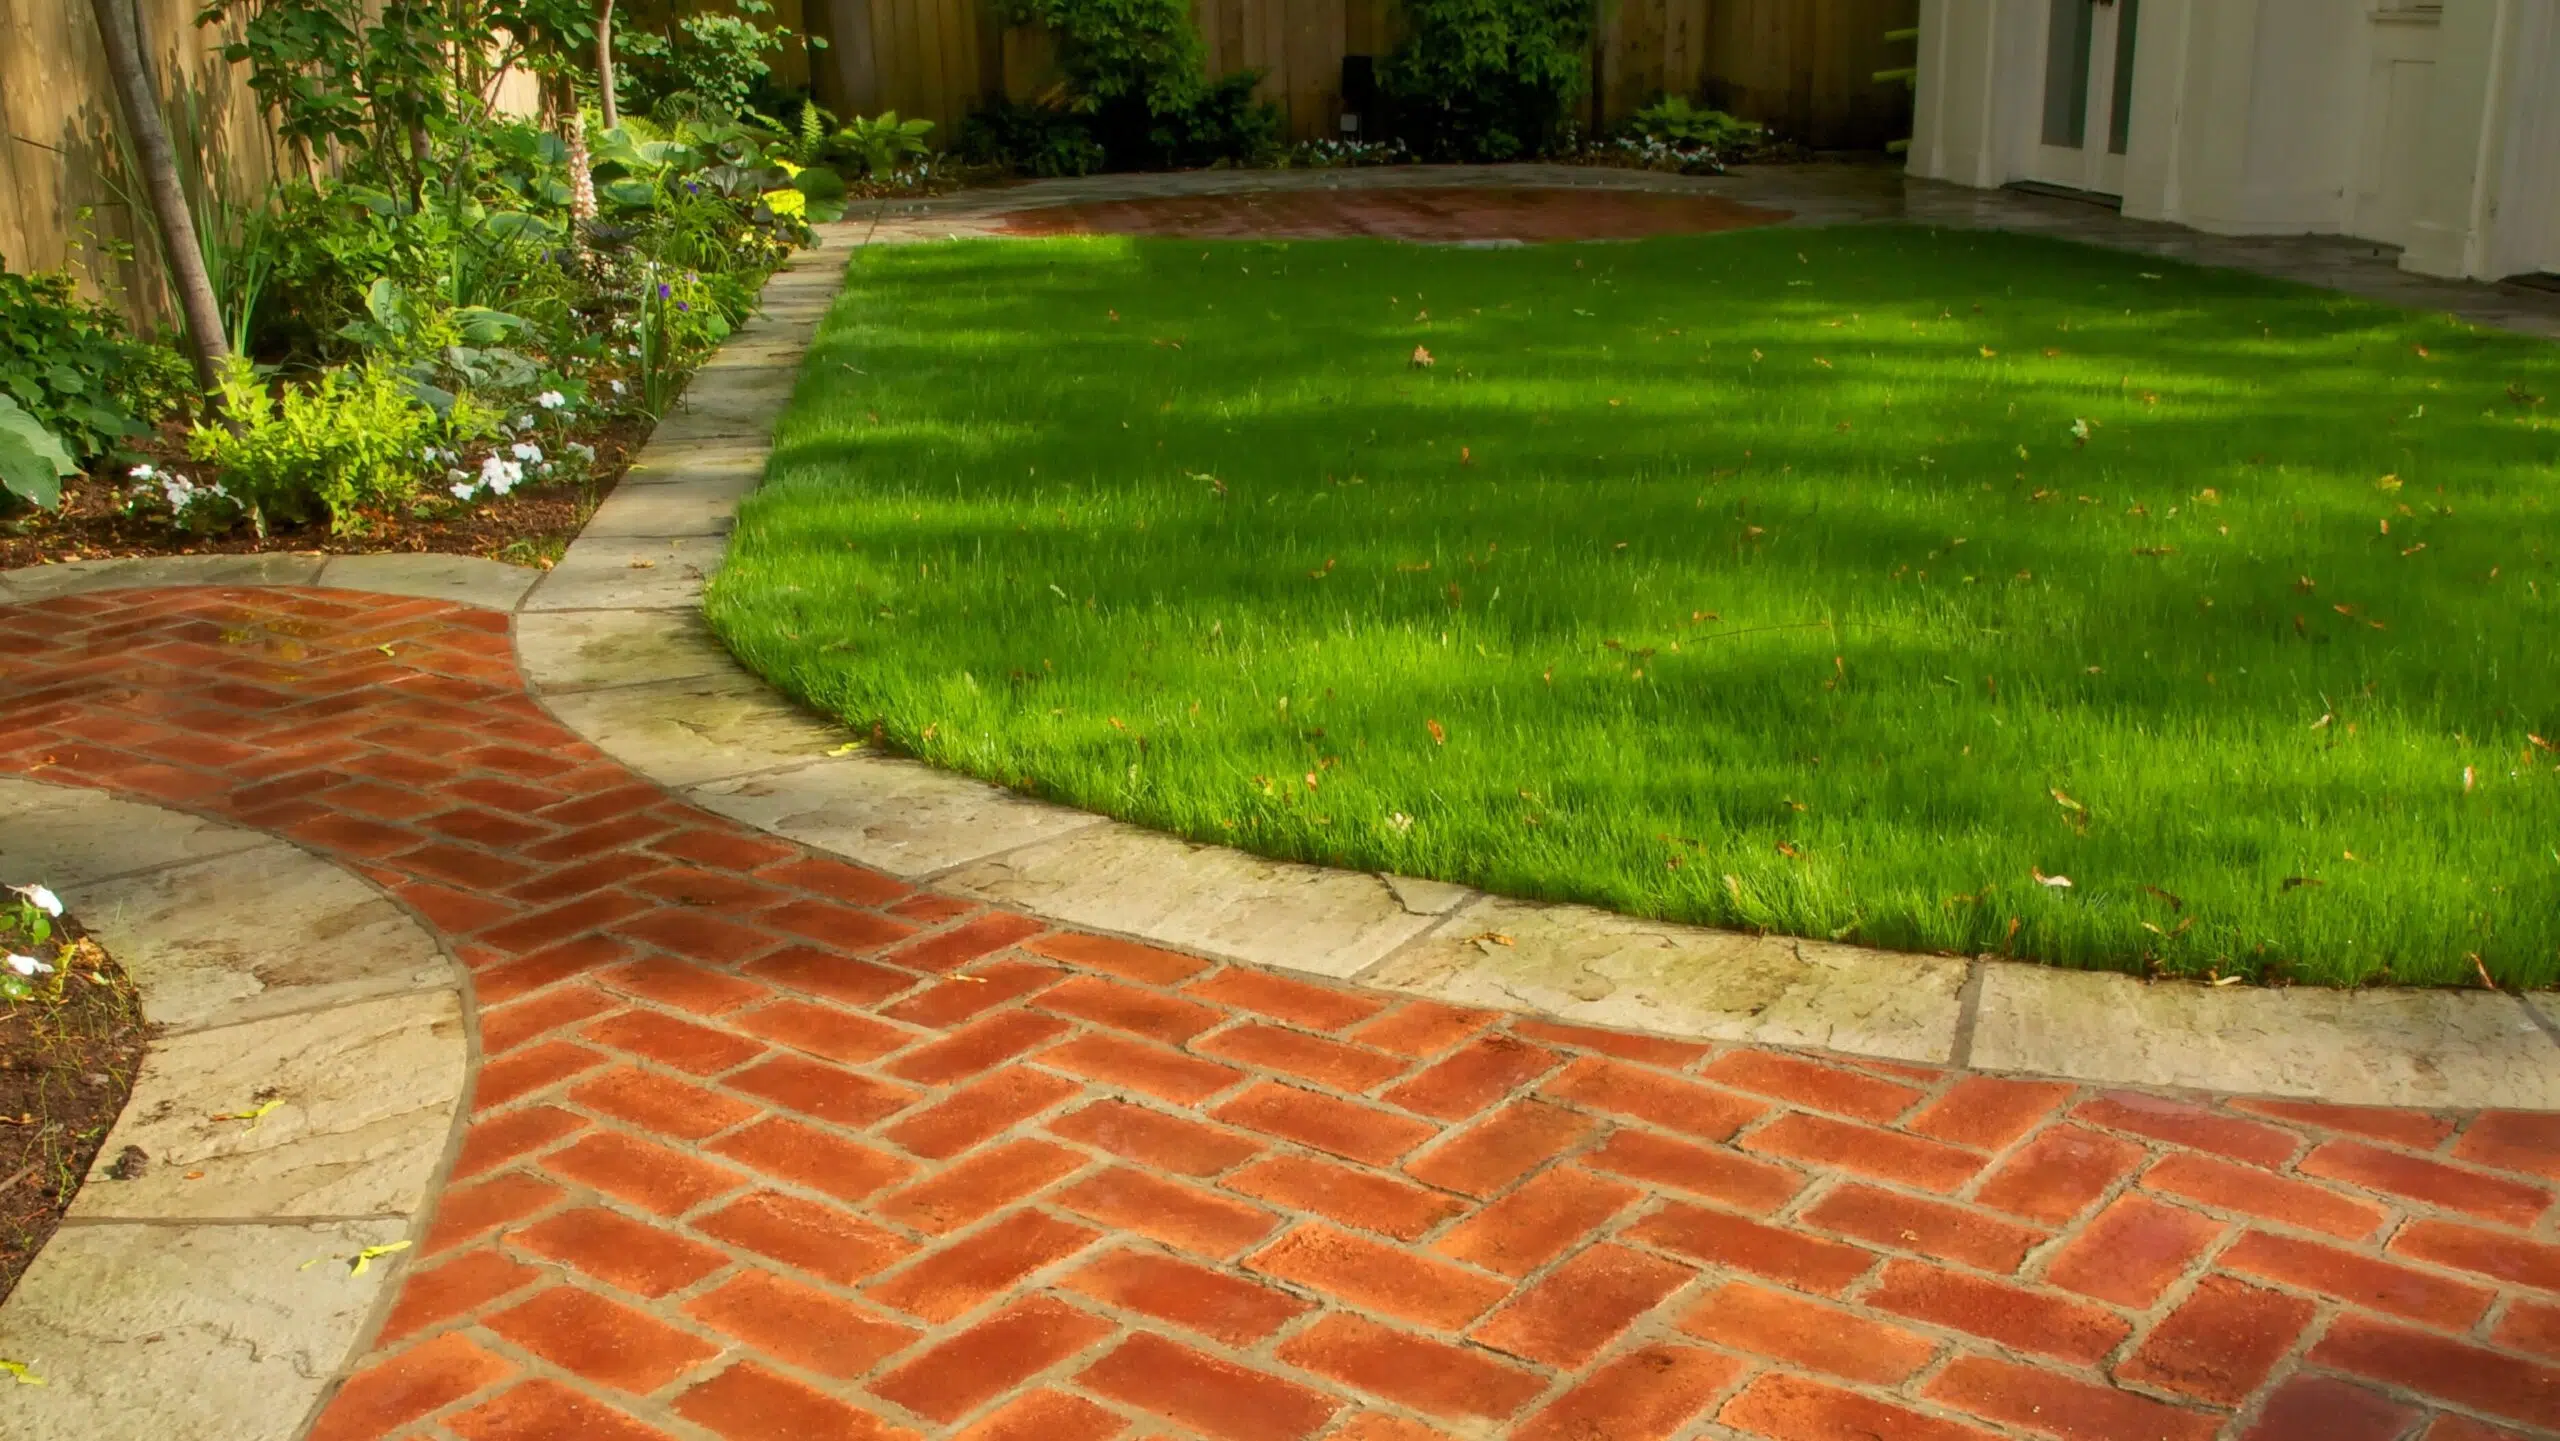 This image depicts a well-maintained backyard garden The focal point is a lush green lawn that covers the majority of the space Surrounding the lawn is a brick pathway that winds through the garden leading to a white building in the background The brick pathway has a herringbone pattern adding visual interest to the design Alongside the path there are various plants and shrubs creating a naturalistic and inviting atmosphere The overall scene conveys a sense of tranquility and attention to detail in the landscaping